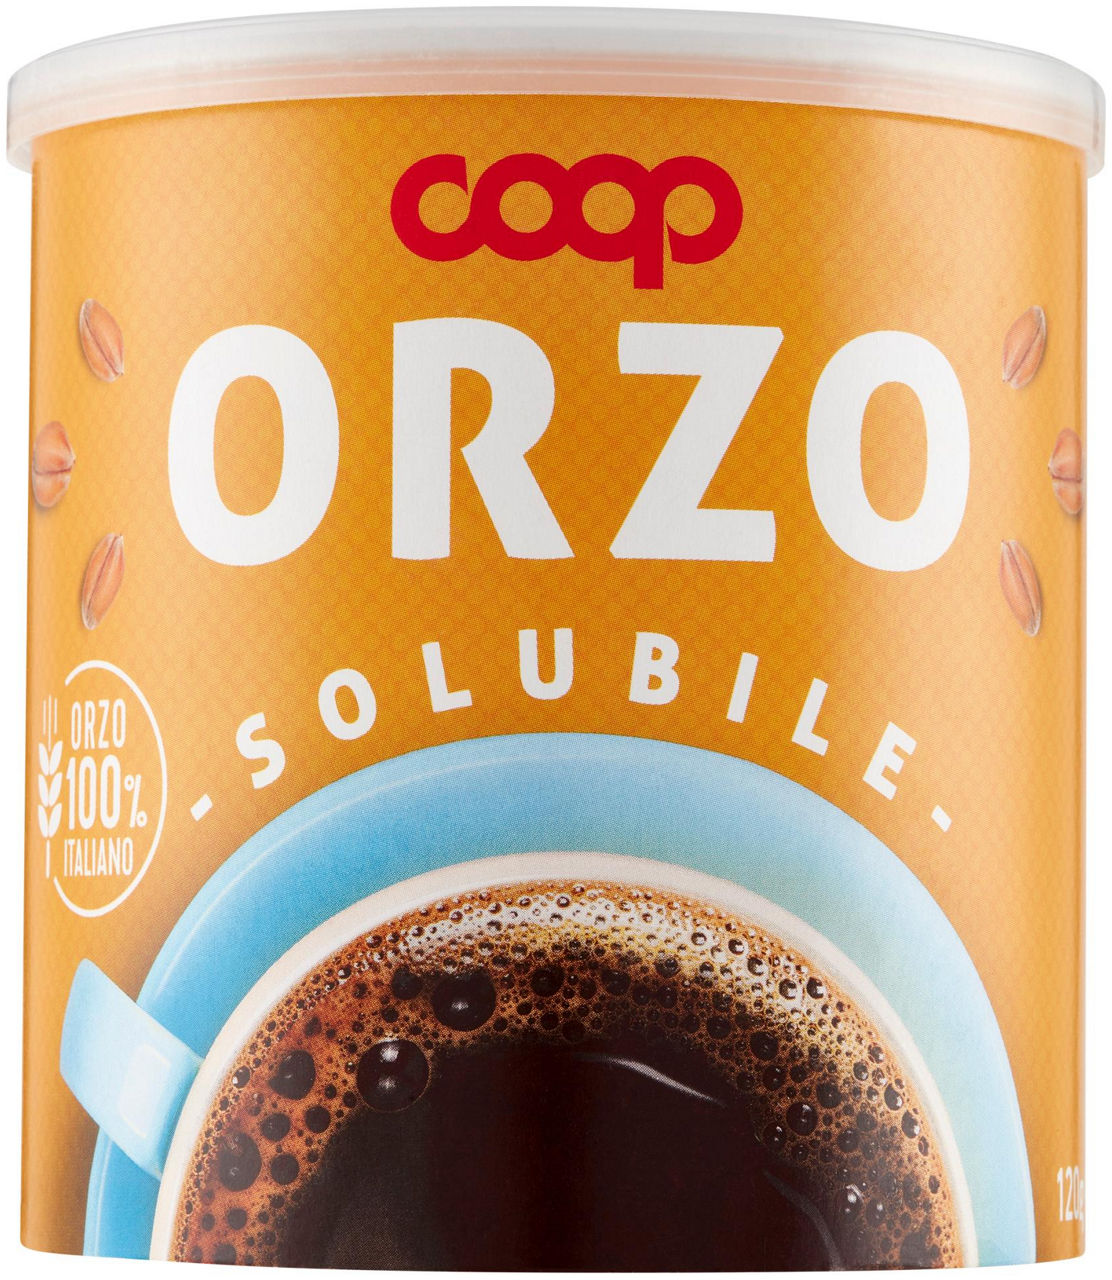 Orzo solubile 120 g - 0